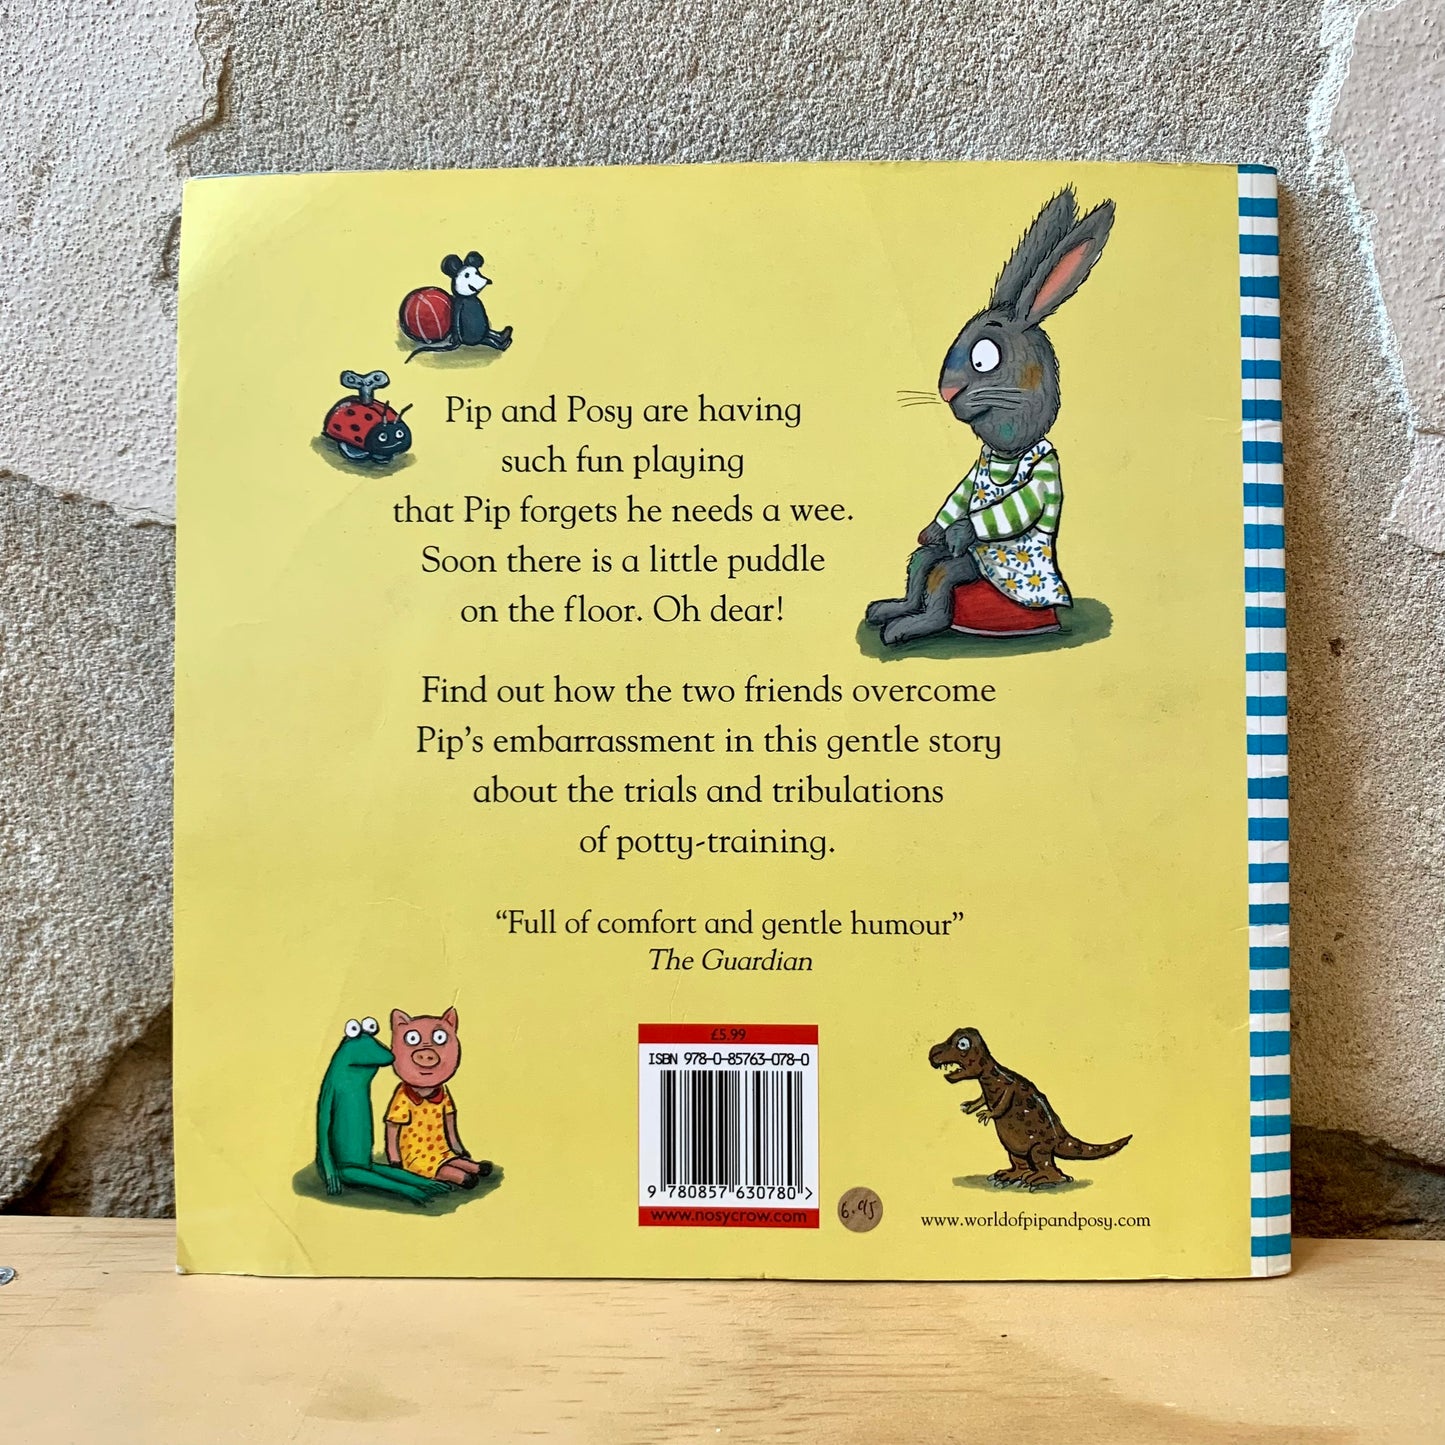 Pip and Posy: The Little Puddle – Axel Scheffler